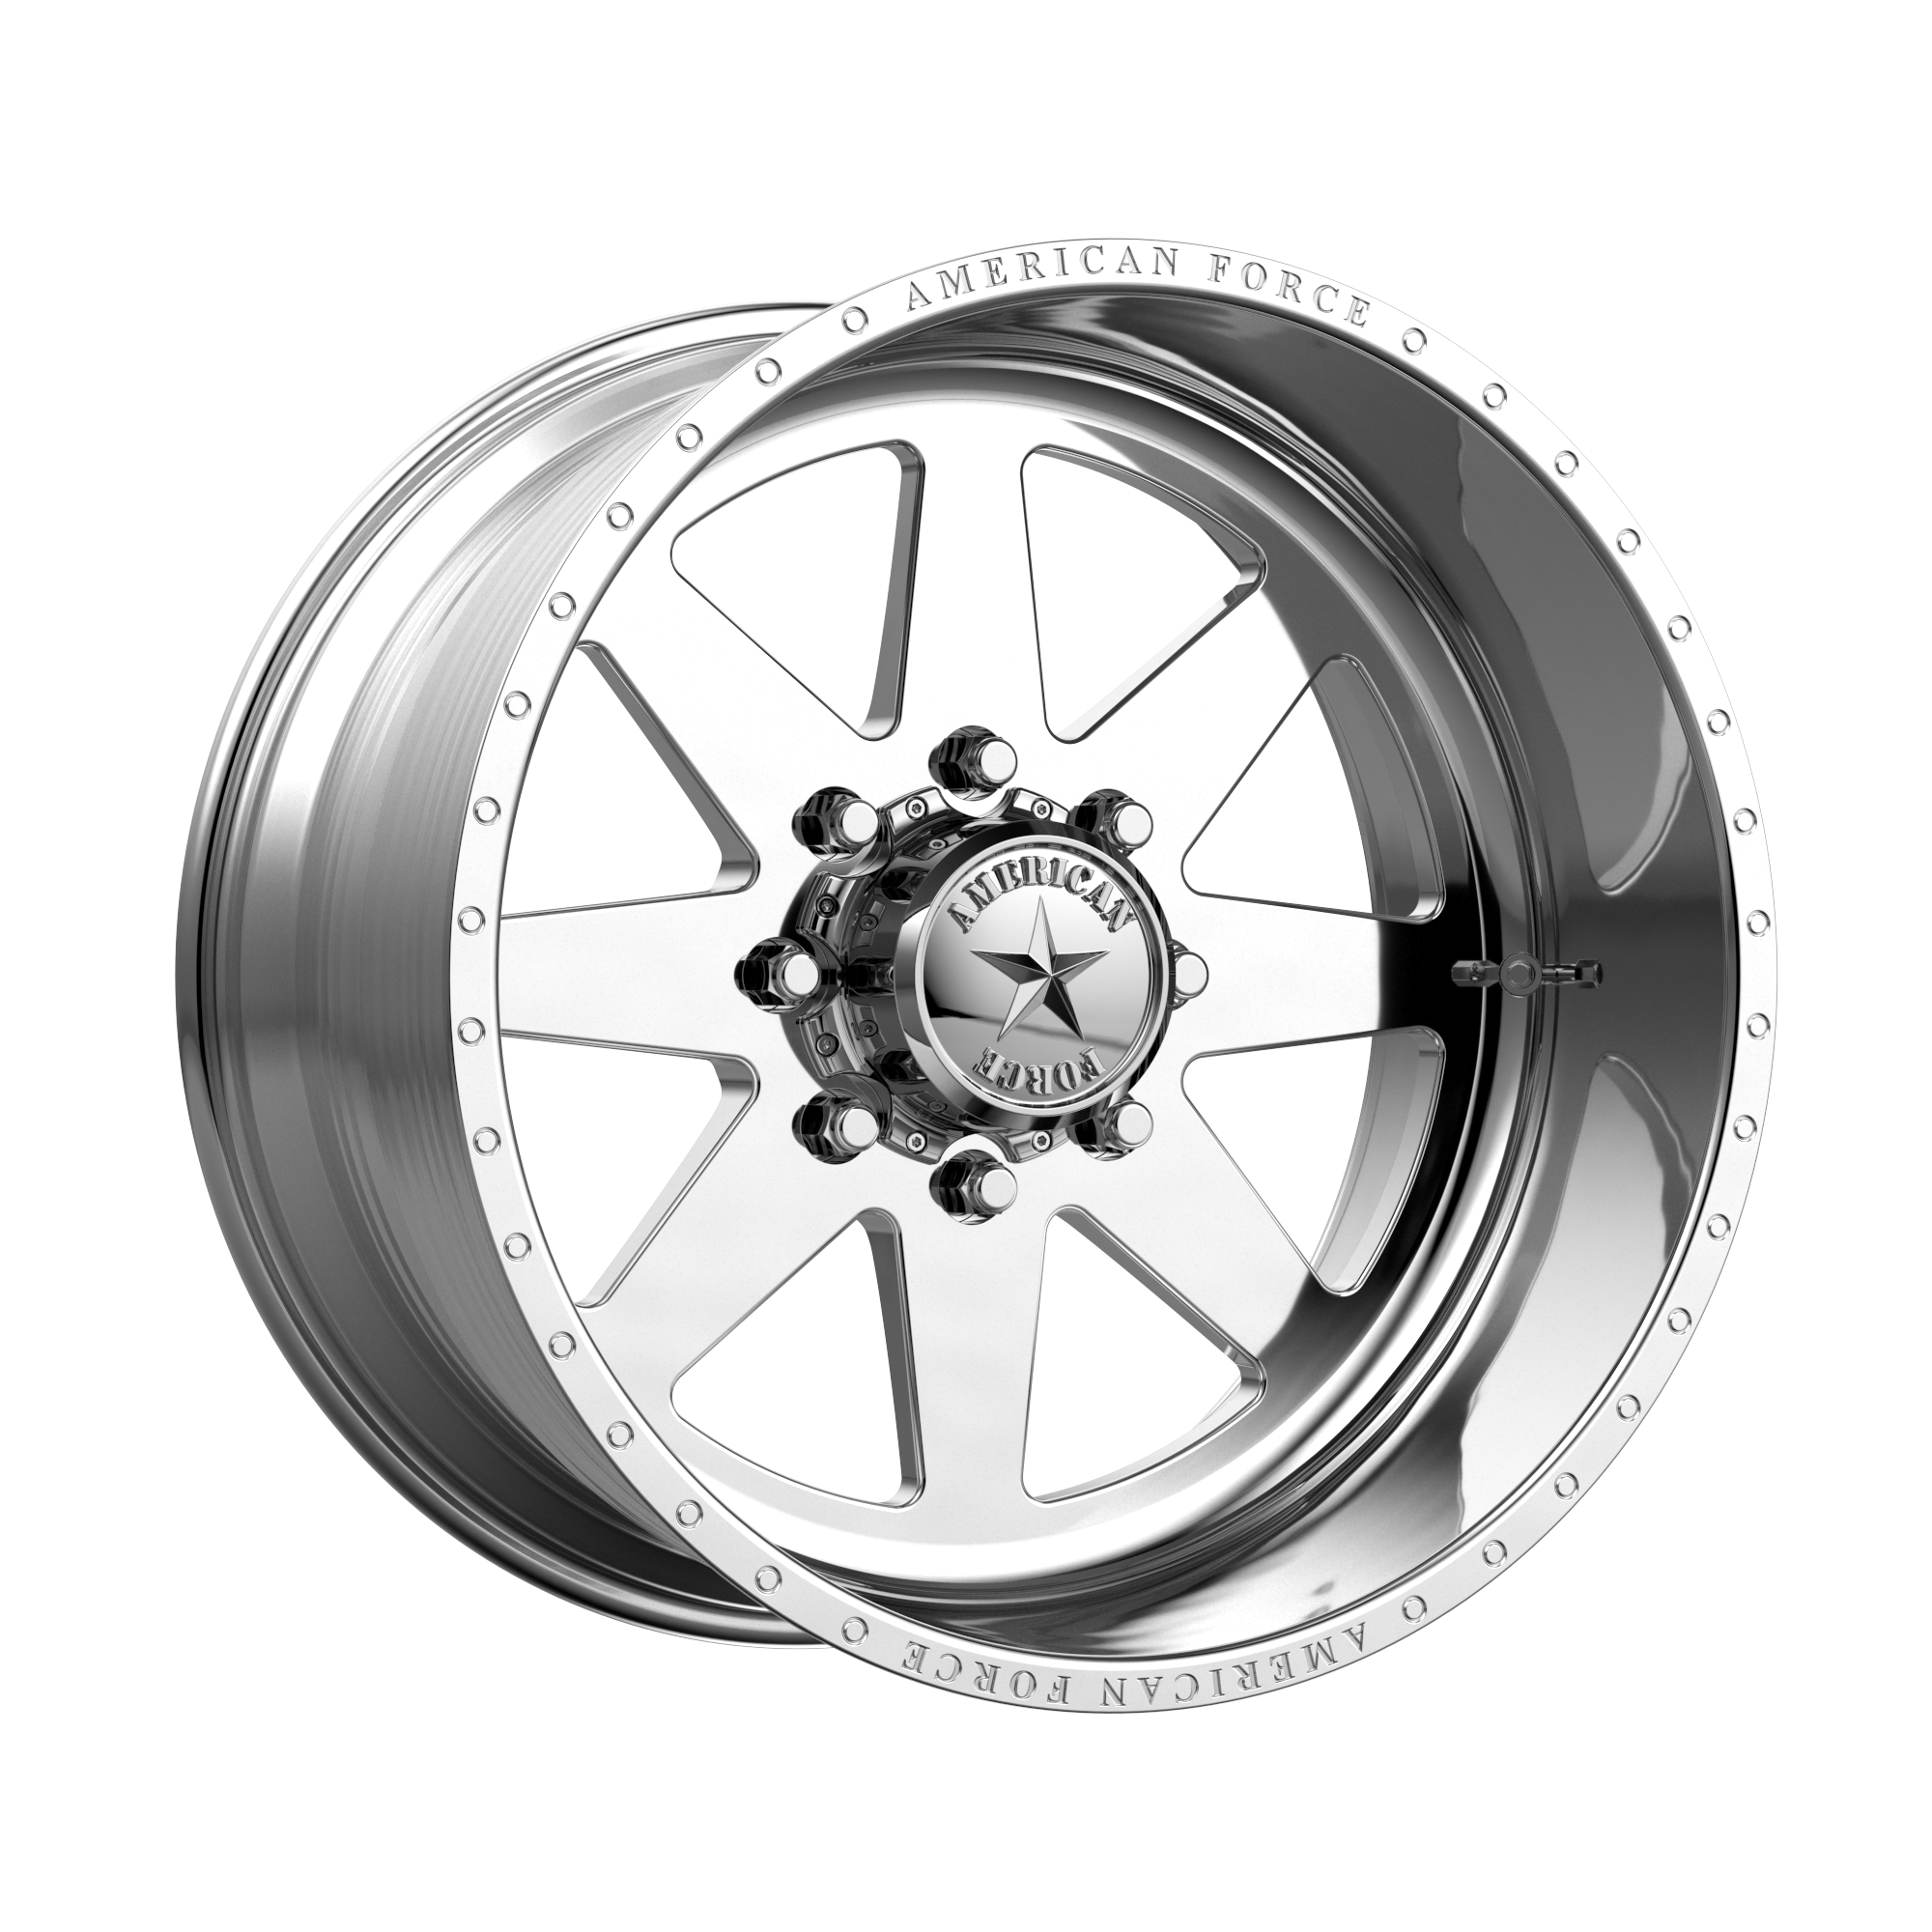 American Force AFW 11 INDEPENDENCE SS 22x11 0 6x139.7/6x5.5 Polished